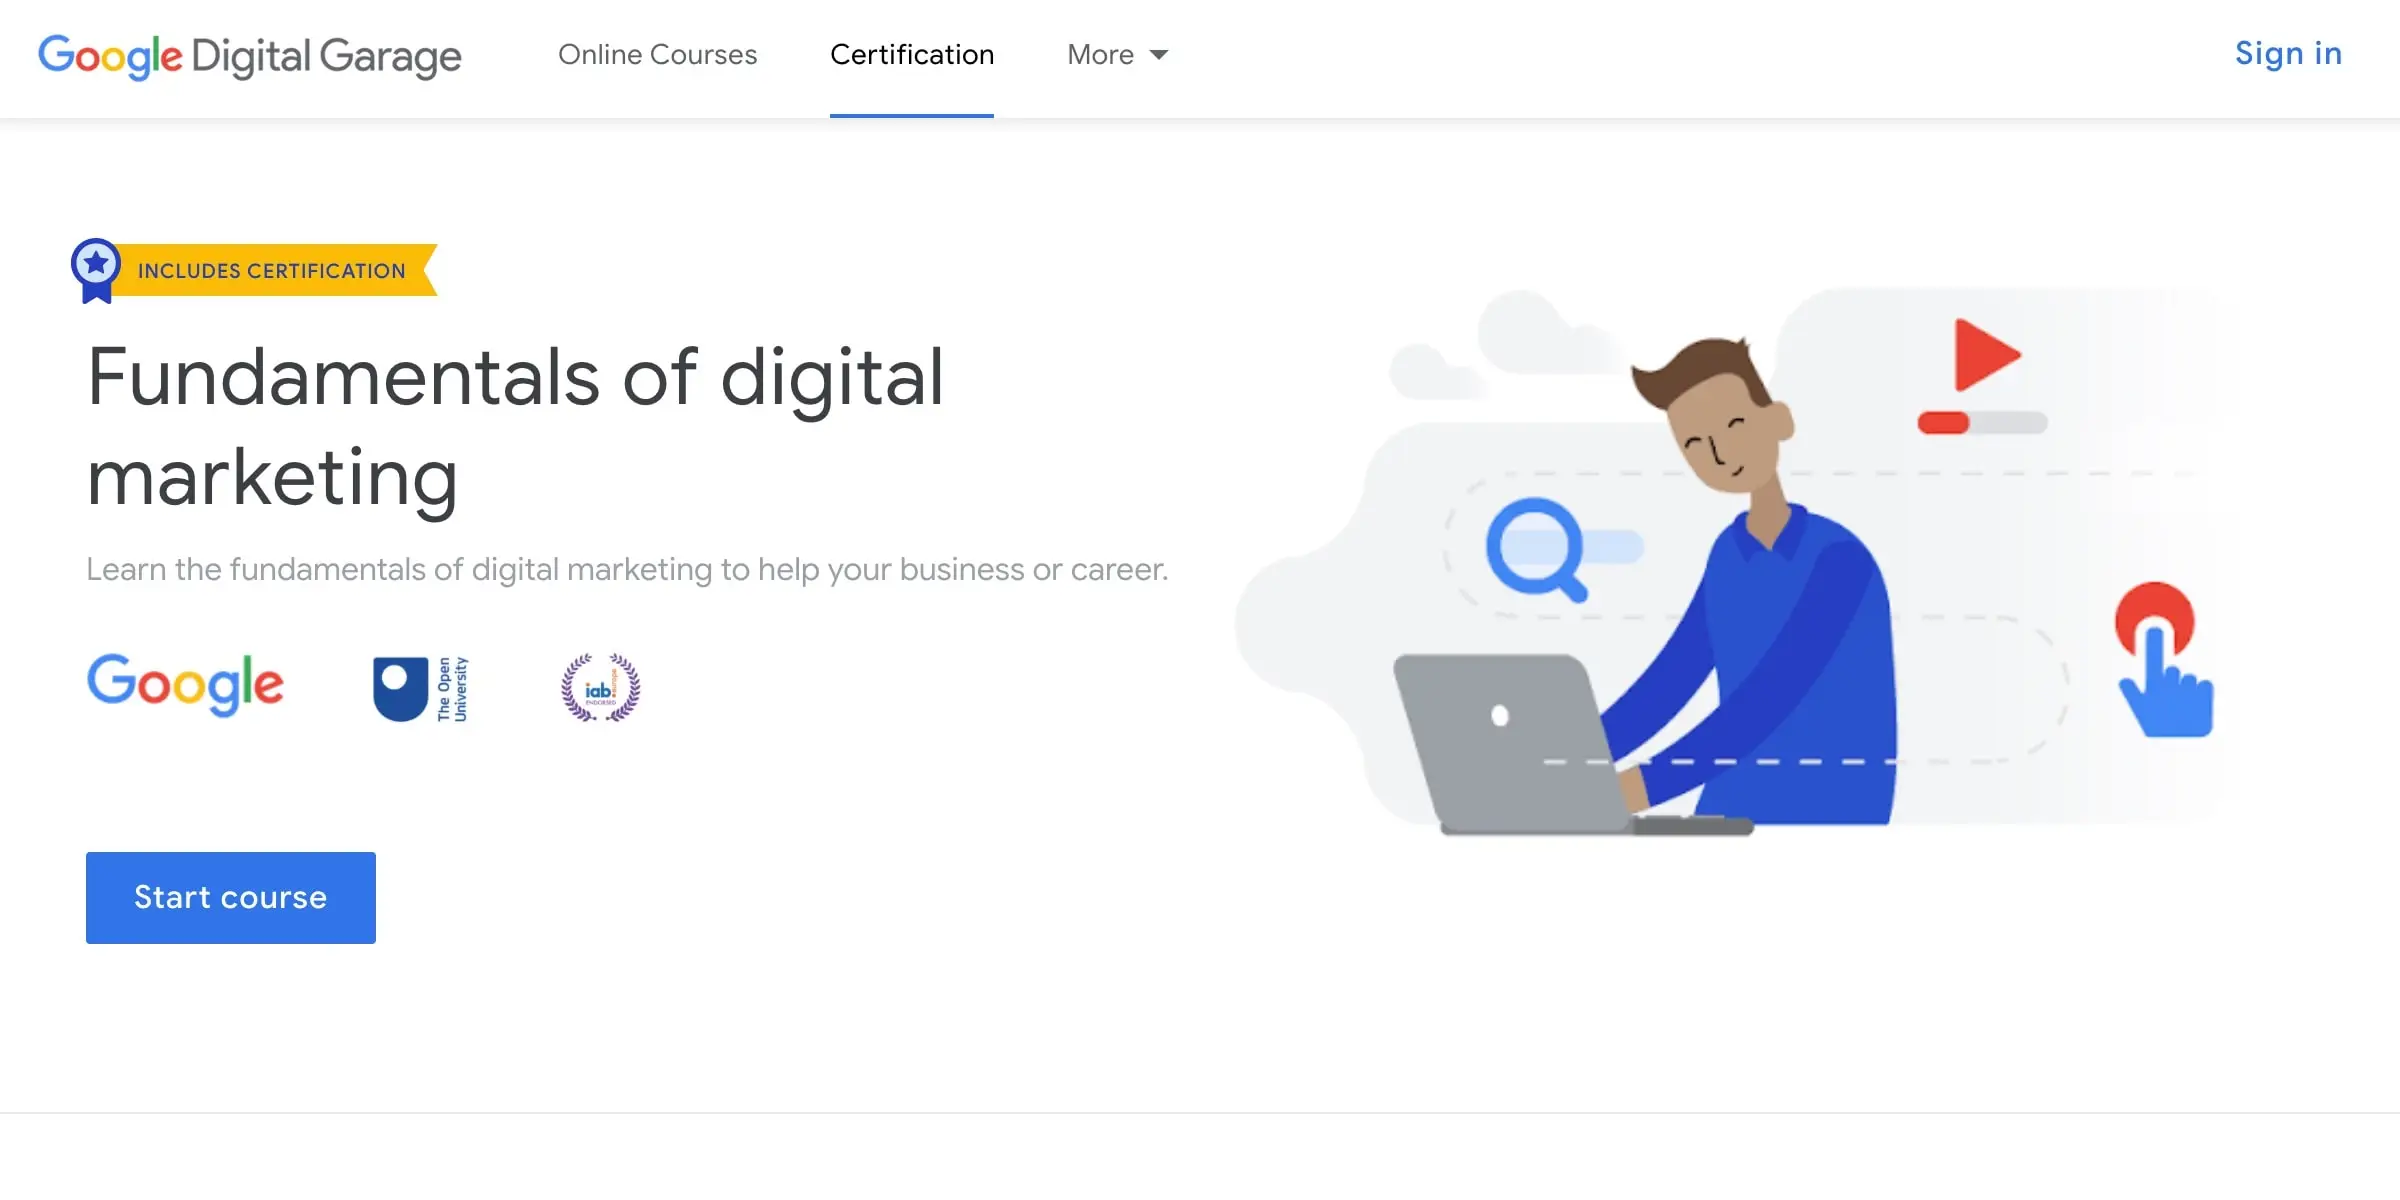 UN Online Free Courses with Certificates 2023 [Full Guide]